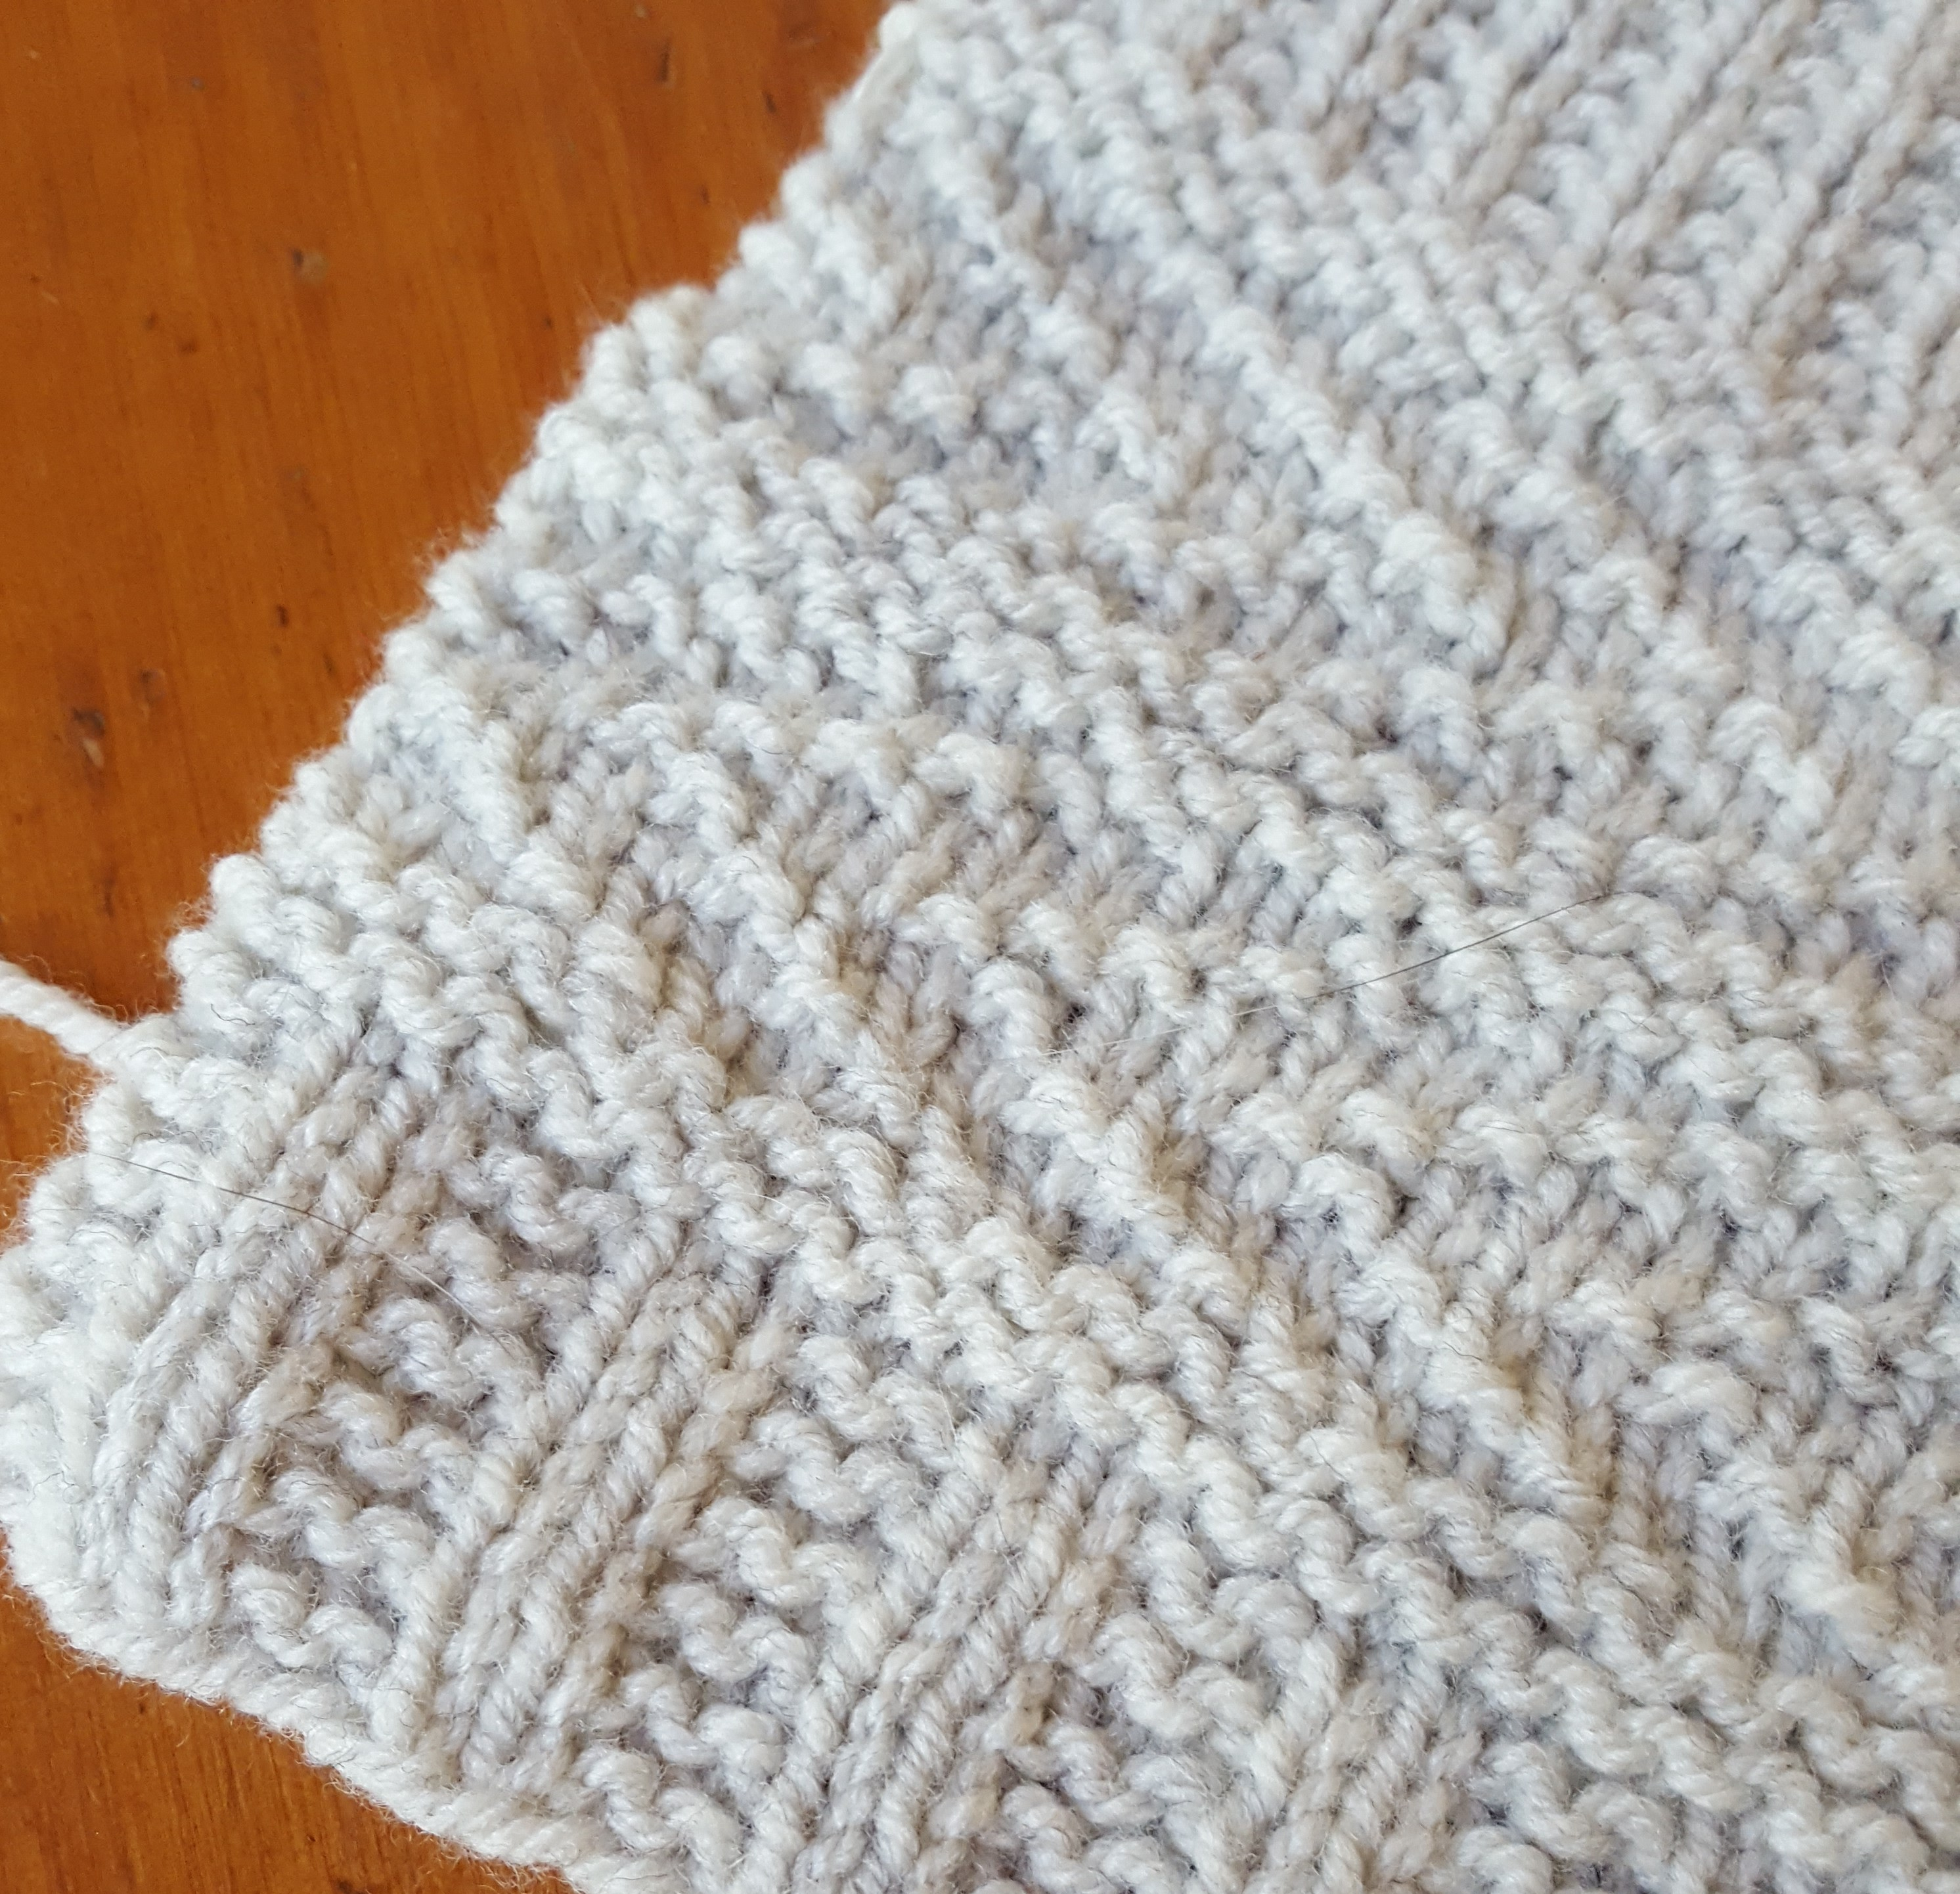 Photo shows a knitted swatch with a textured pattern in light gray yarn.